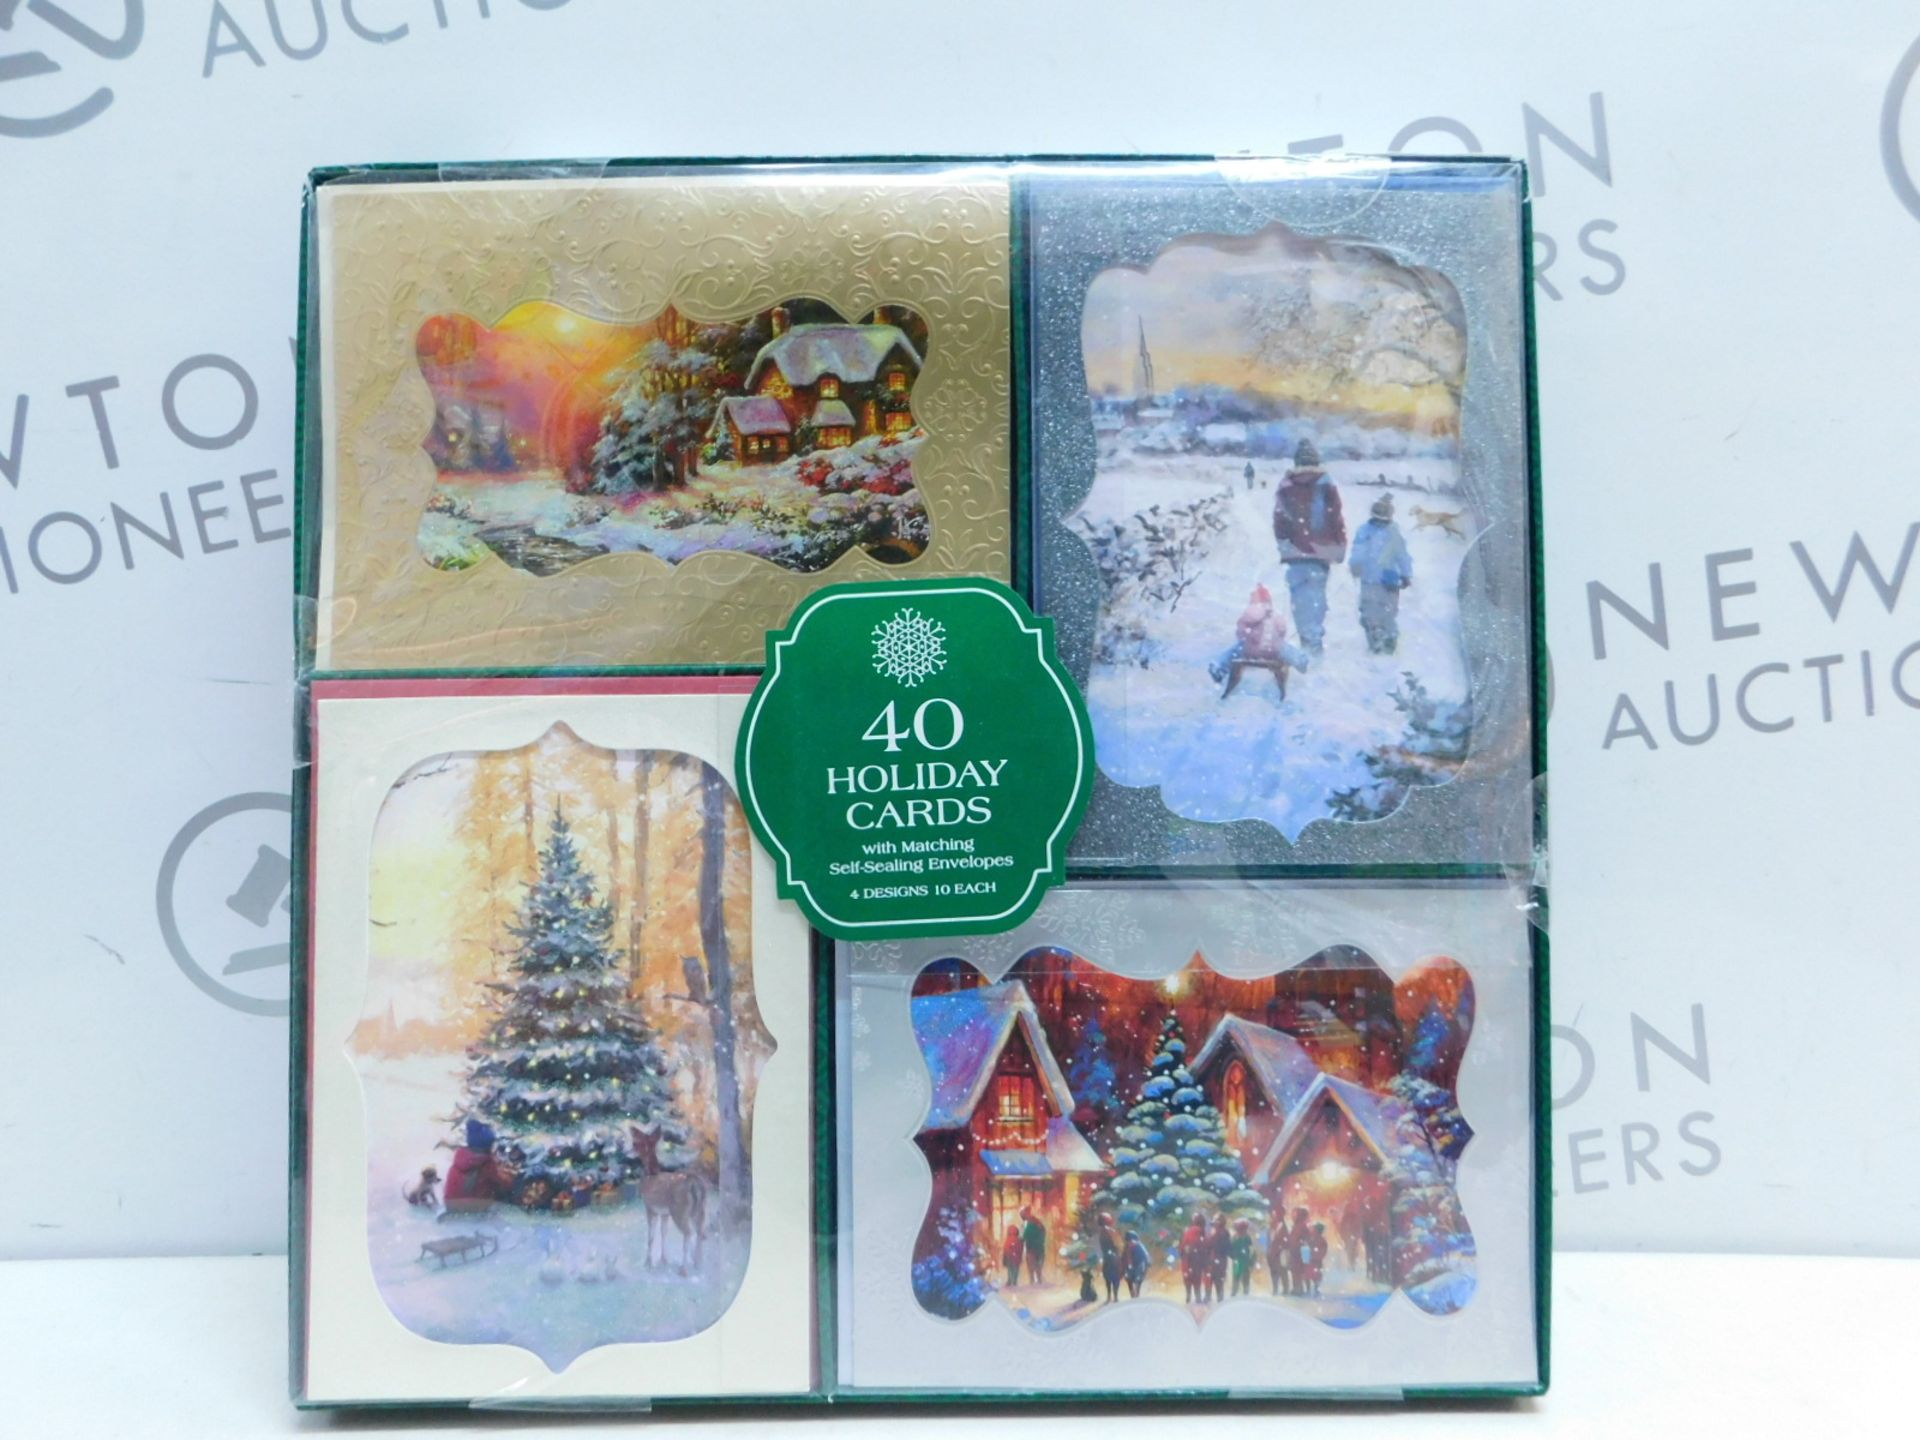 1 SEALED BOX OF 40 HANDCRAFTED HOLIDAY CARDS WITH SELF-SEALING ENVELOPES RRP Â£29.99